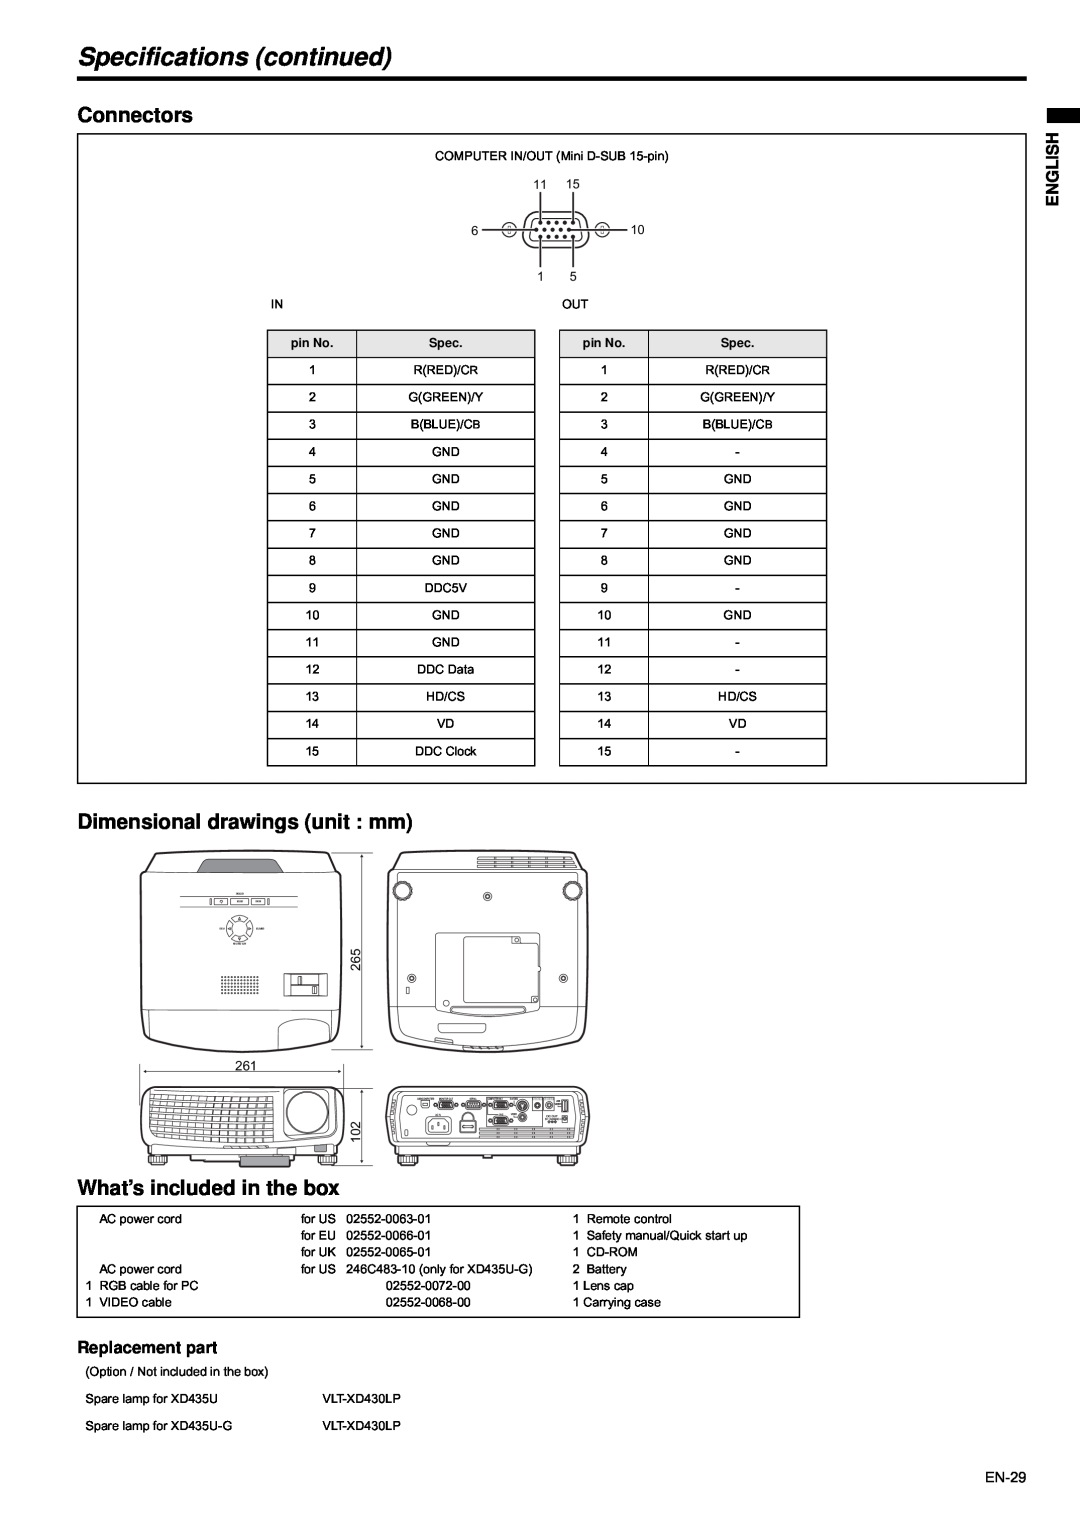 Mitsubishi Electronics XD435U-G user manual Specifications continued, Connectors, Dimensional drawings unit mm, pin No 